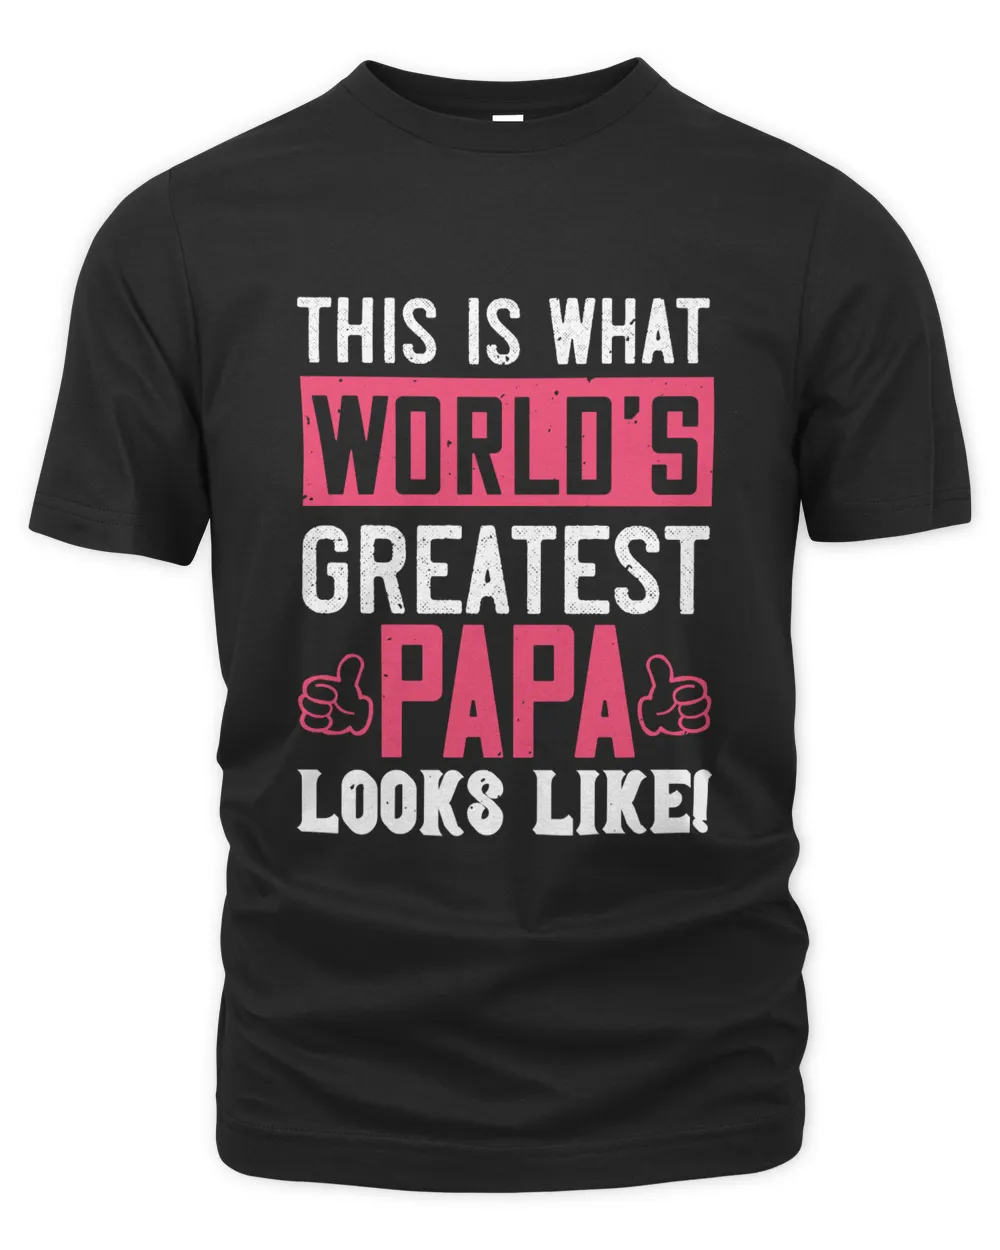 This Is What The World’s Greatest Papa Looks Like! Papa T-shirt Father's Day Gift